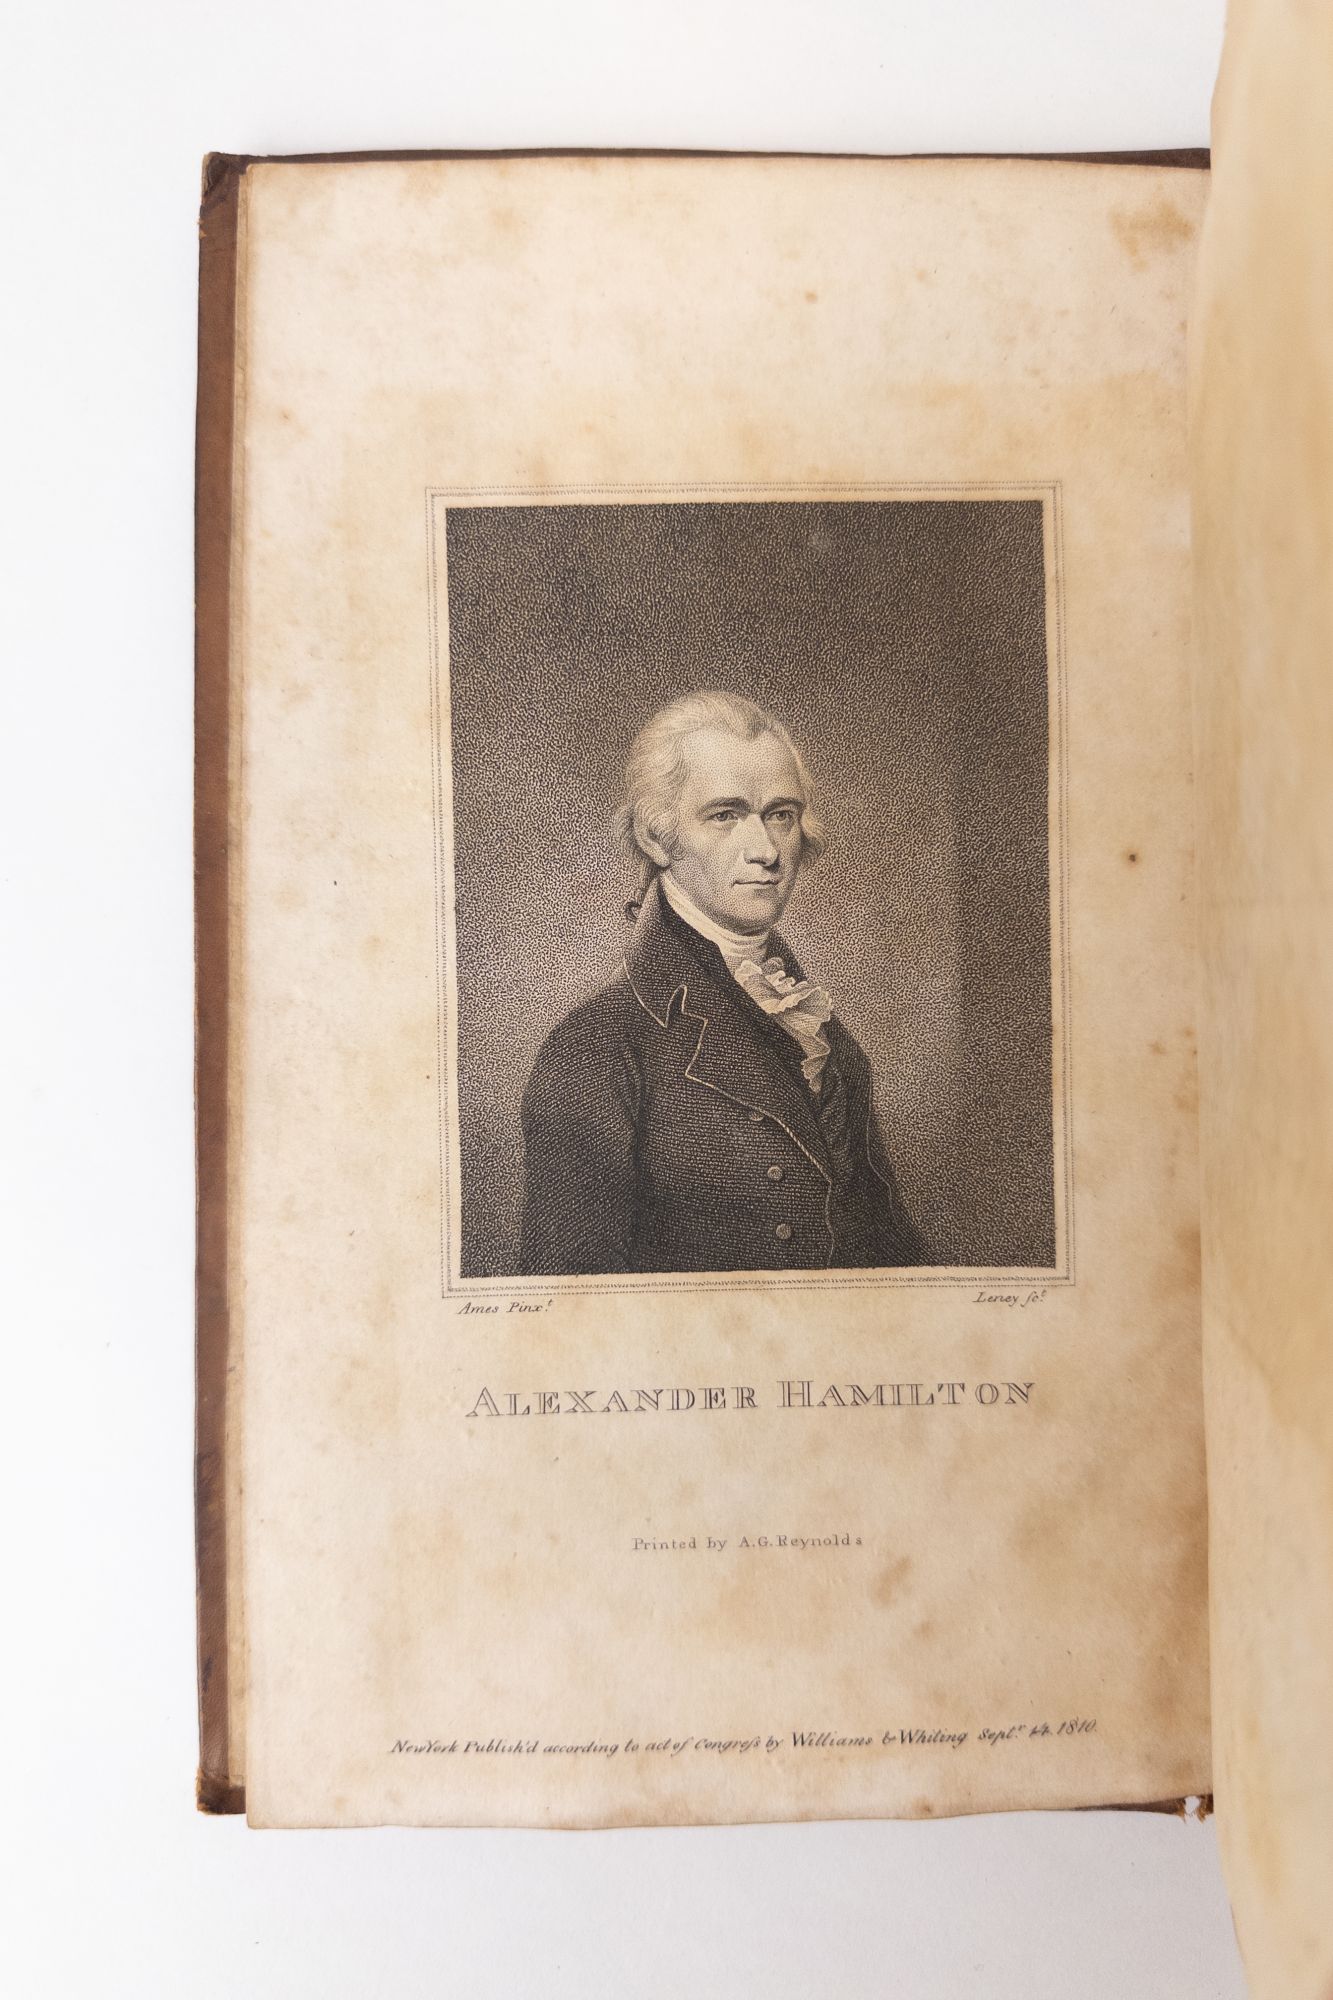 Product Image for THE WORKS OF ALEXANDER HAMILTON [VOLUME ONE ONLY]